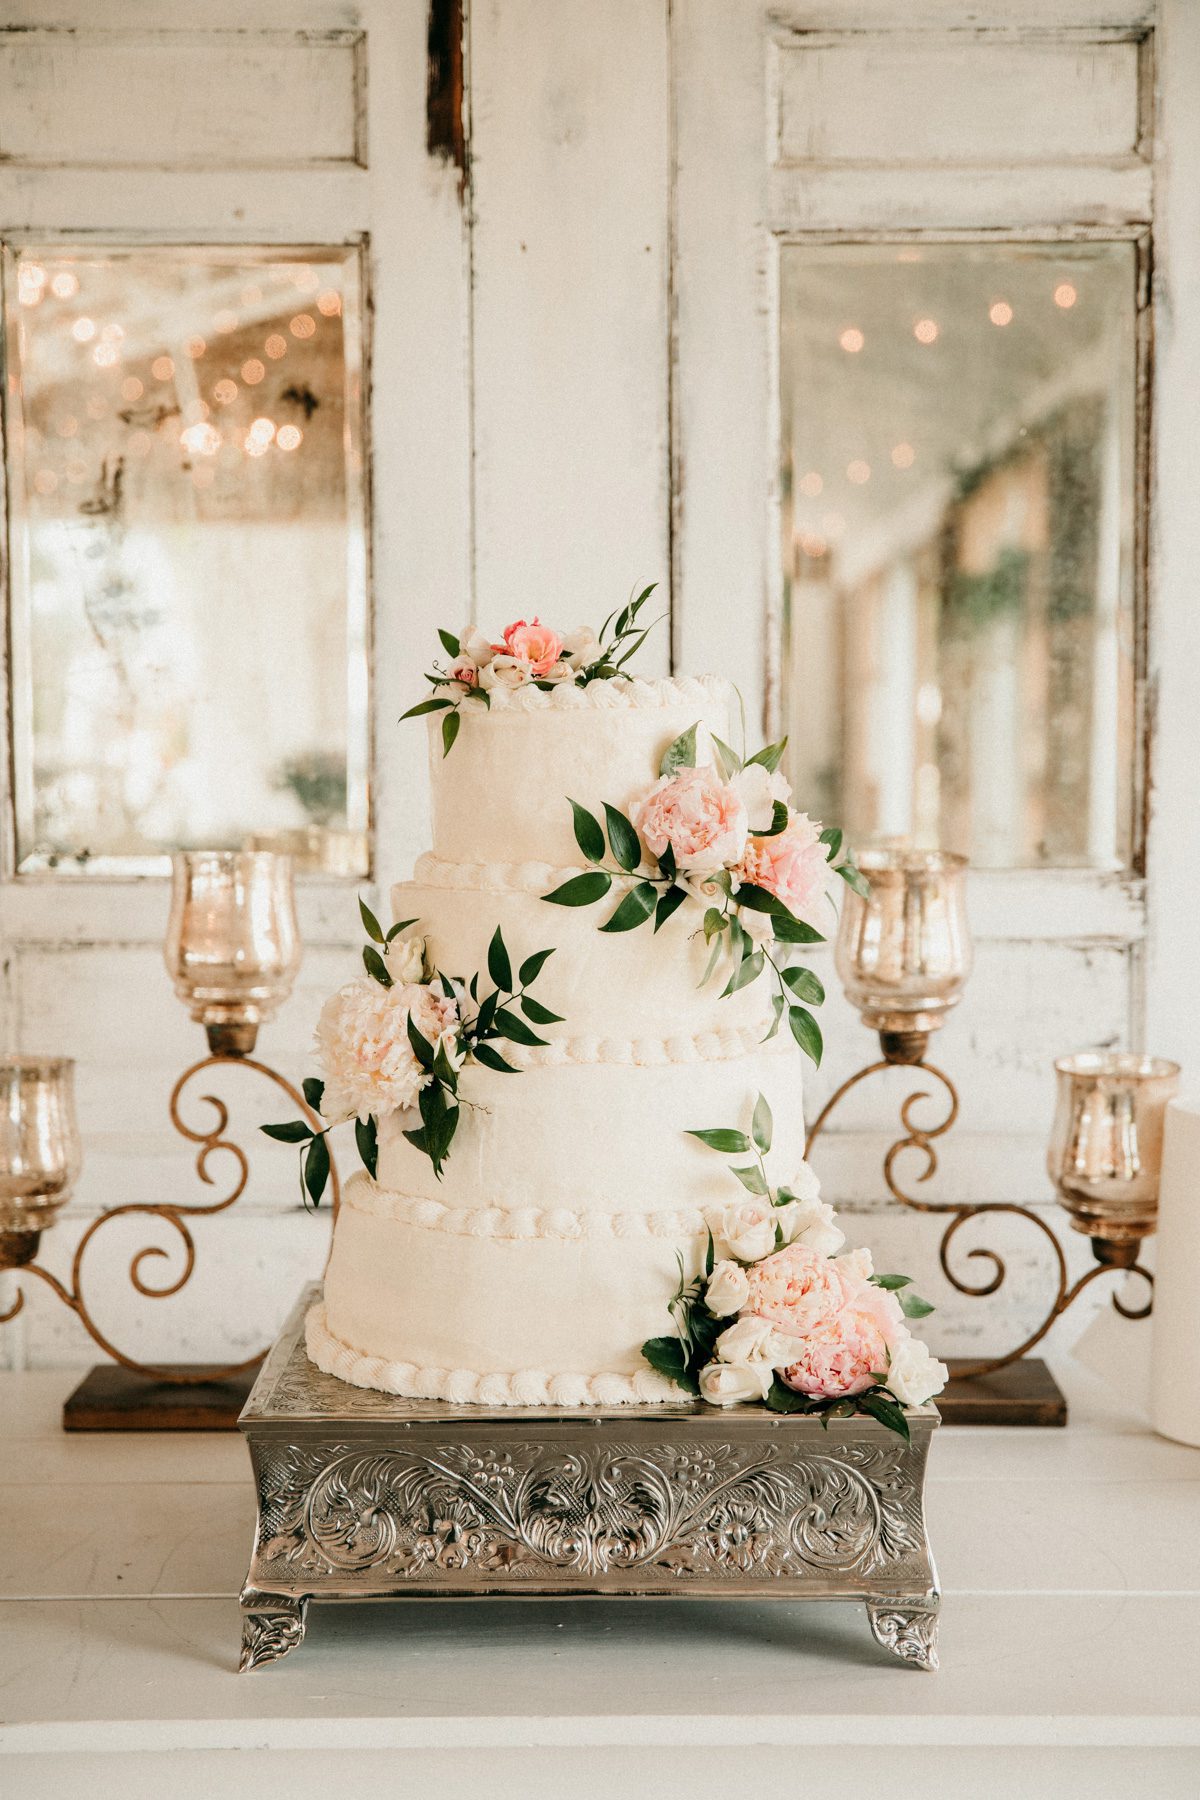 Traditional wedding cake for outdoor reception 